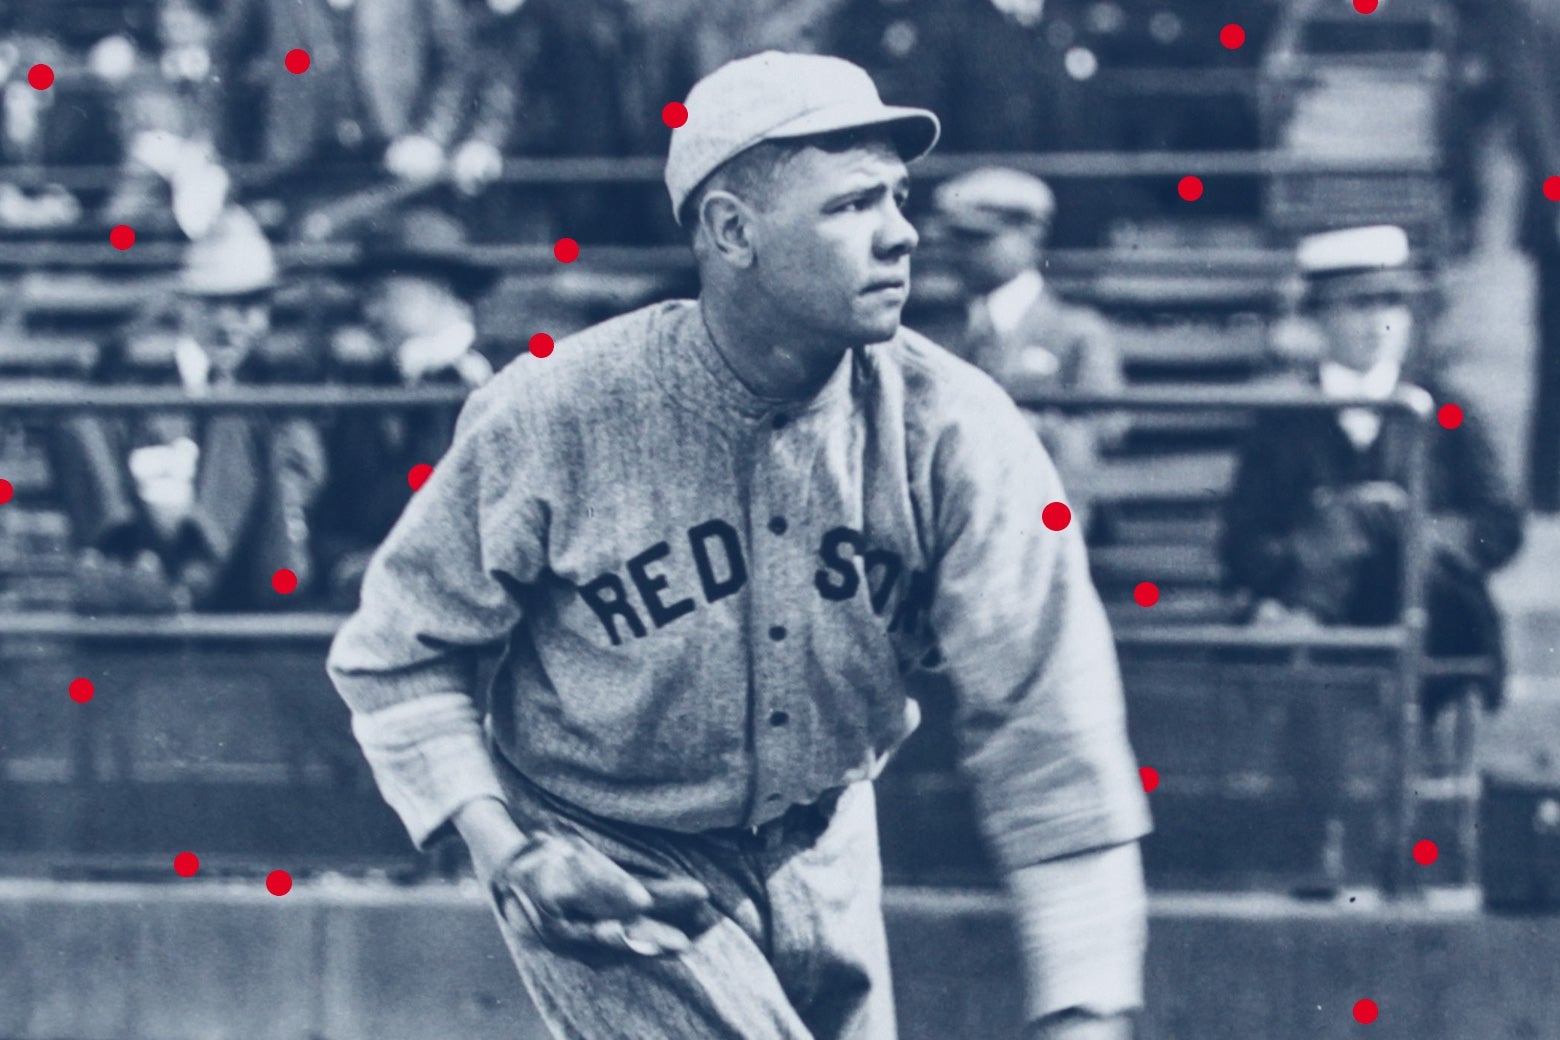 Babe Ruth in a Red Sox uniform throwing a baseball, surrounded by red dots.